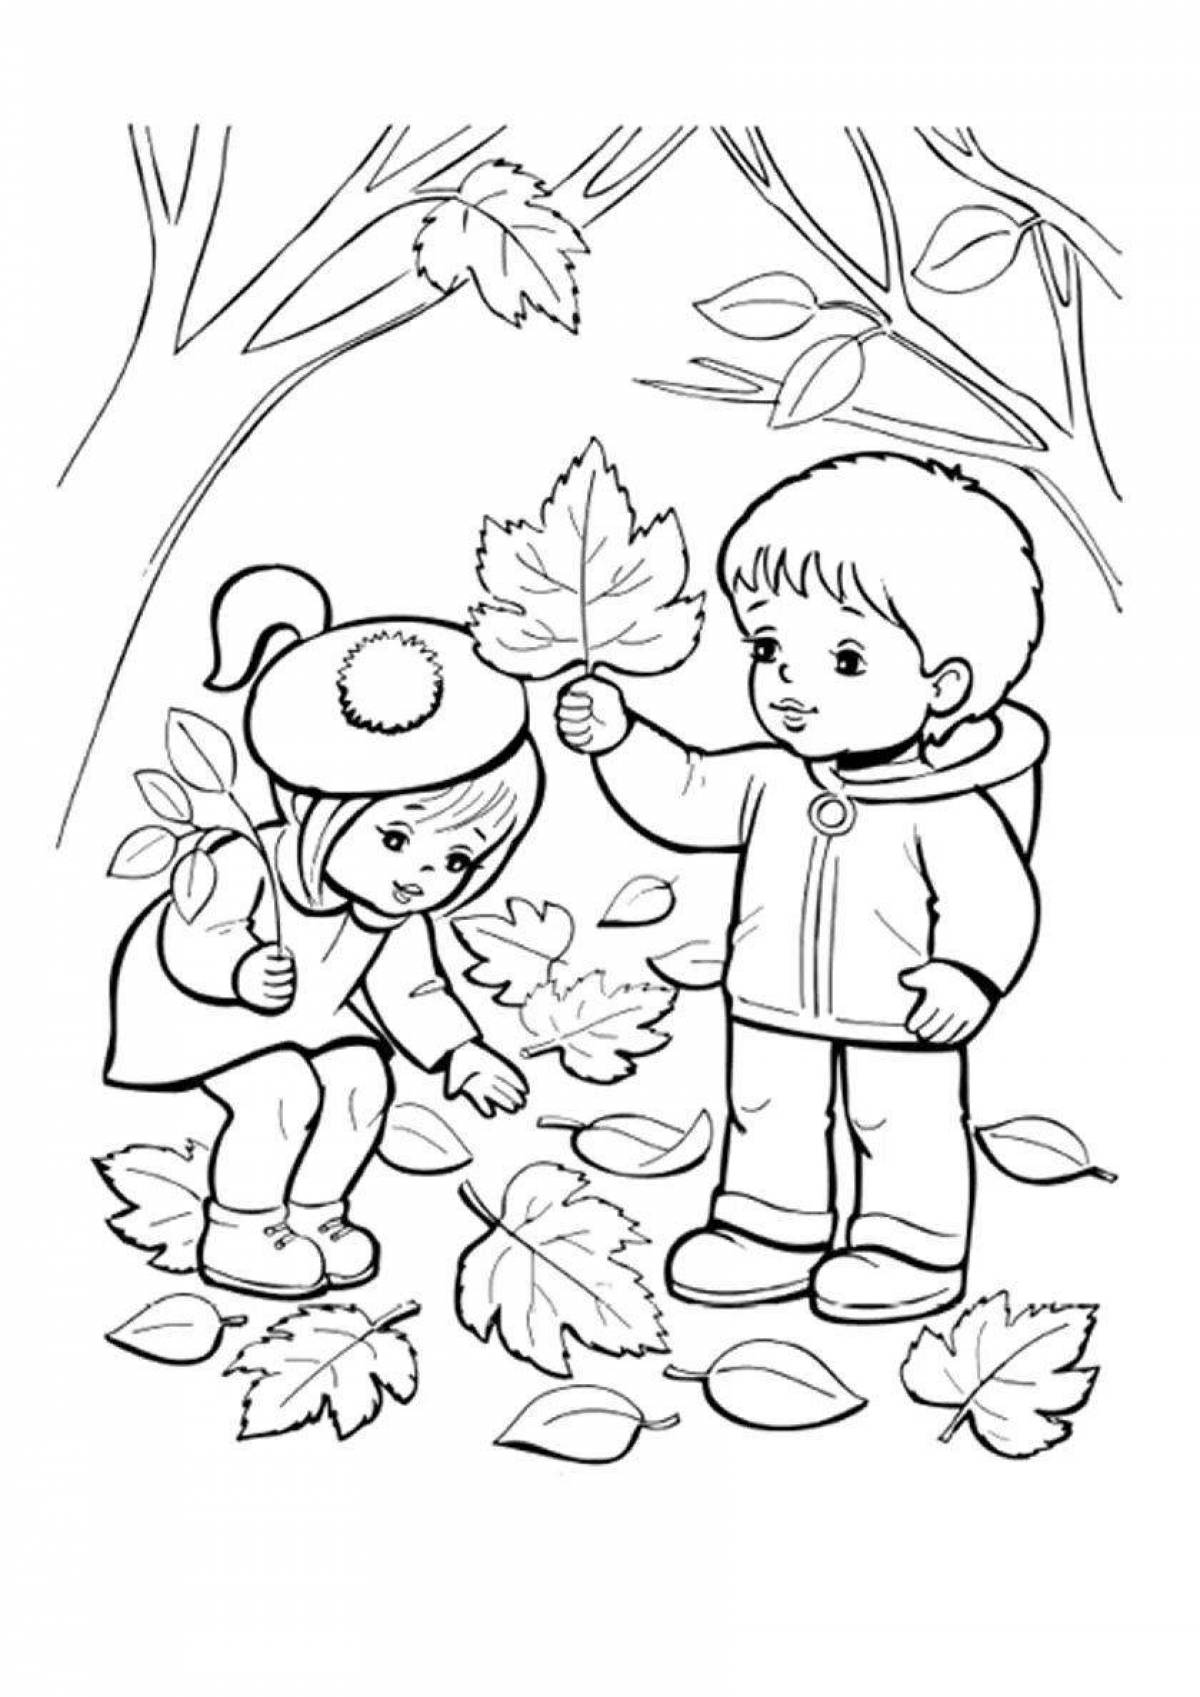 Fantastic autumn coloring book for 5-6 year olds